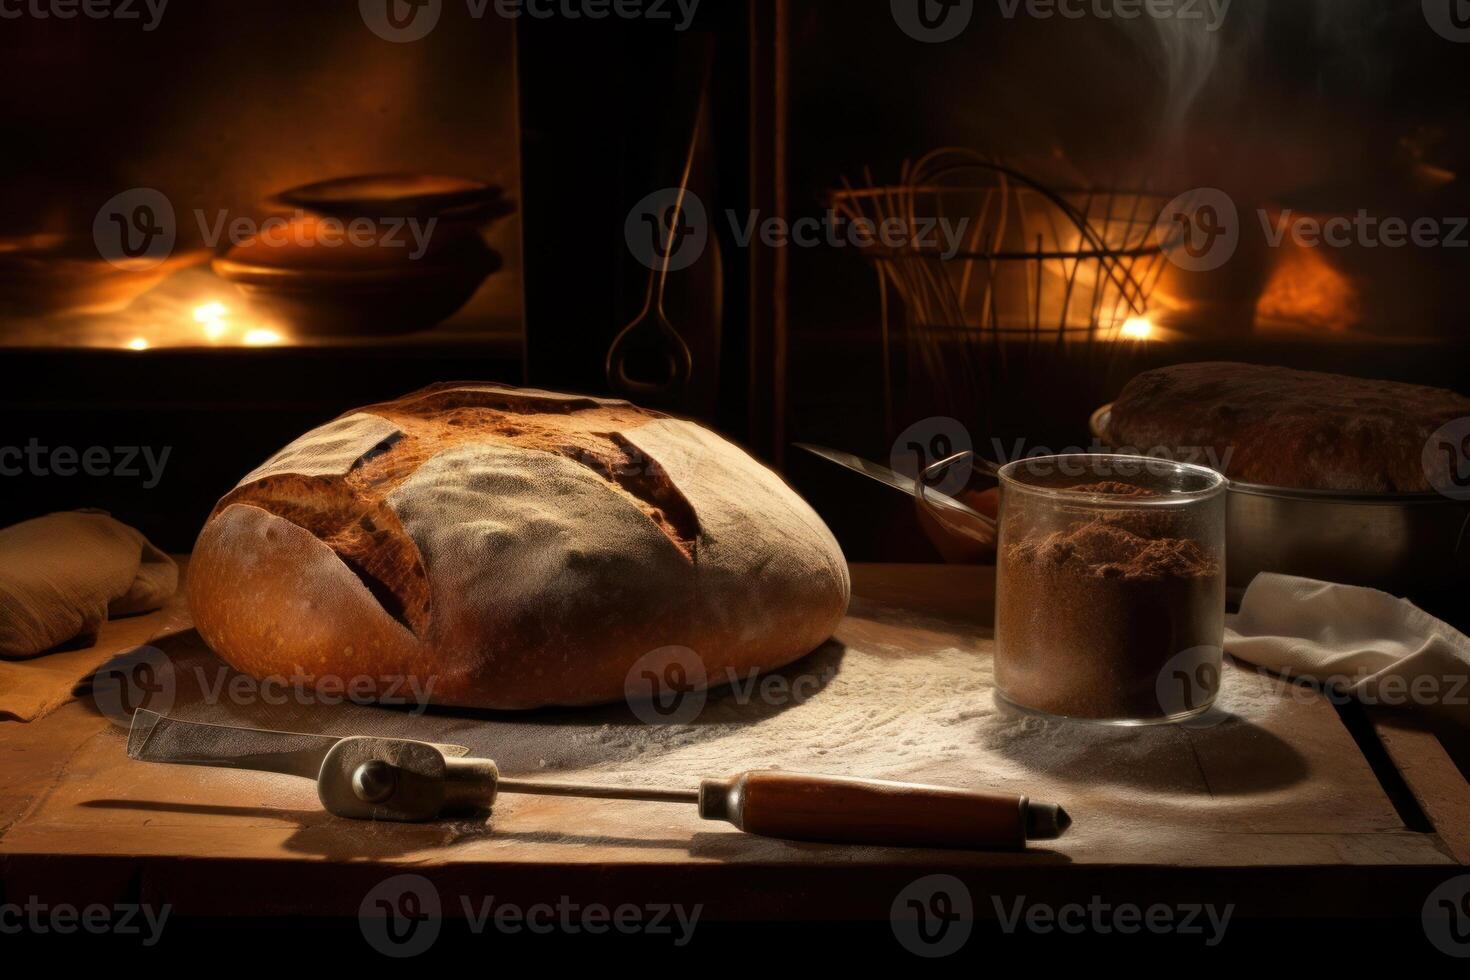 stock photo of a bake bread in front oven and stuff food photography